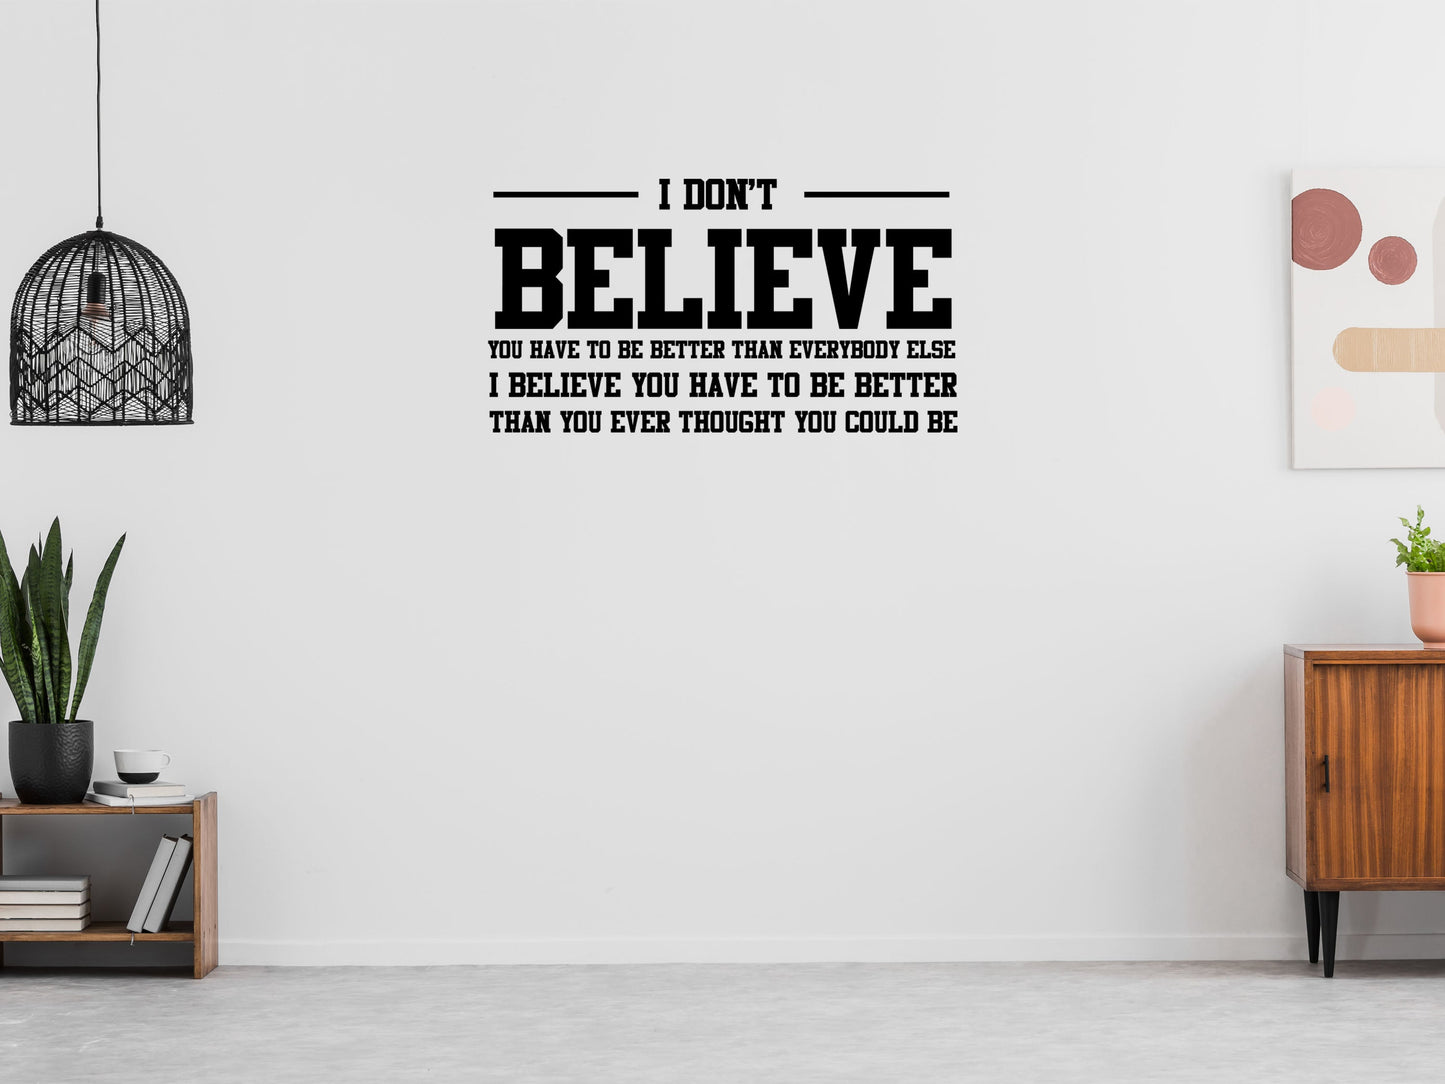 I Believe Family Room Wall Sticker Quote - Inspirational Wall Signs Vinyl Wall Decal Inspirational Wall Signs 